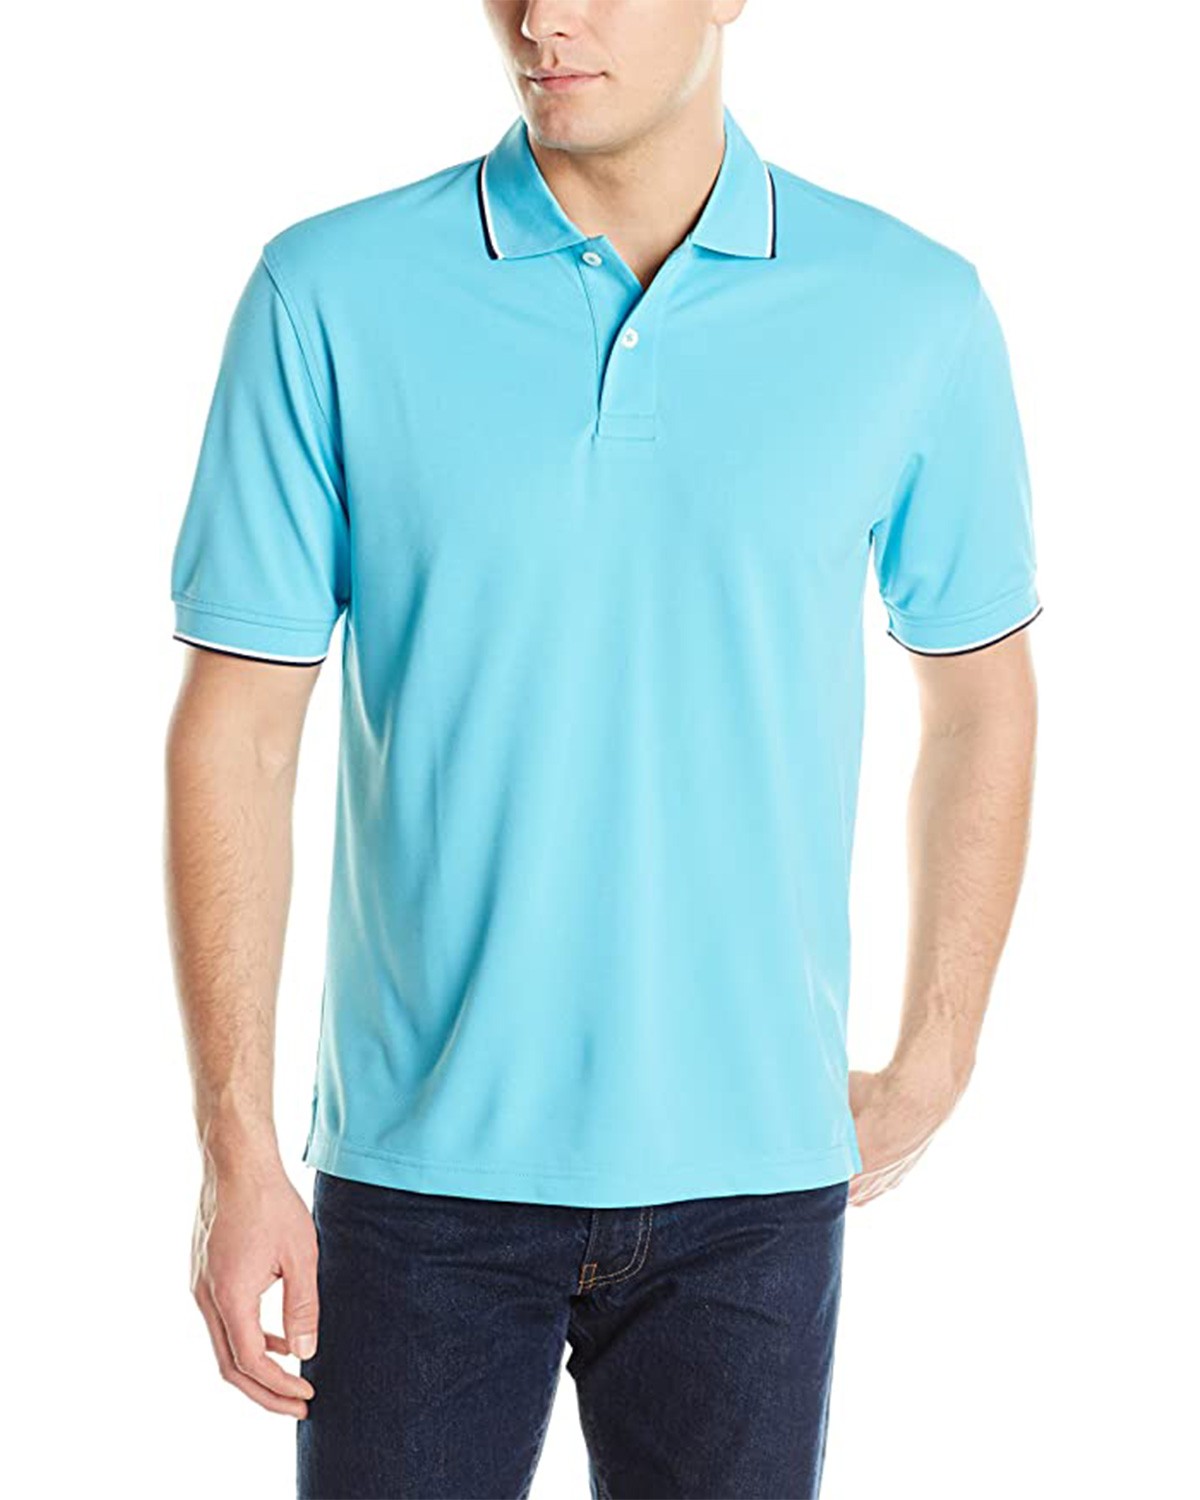 Izod 13Z0116 TIPPED Pique UE POLO - Free Shipping Available